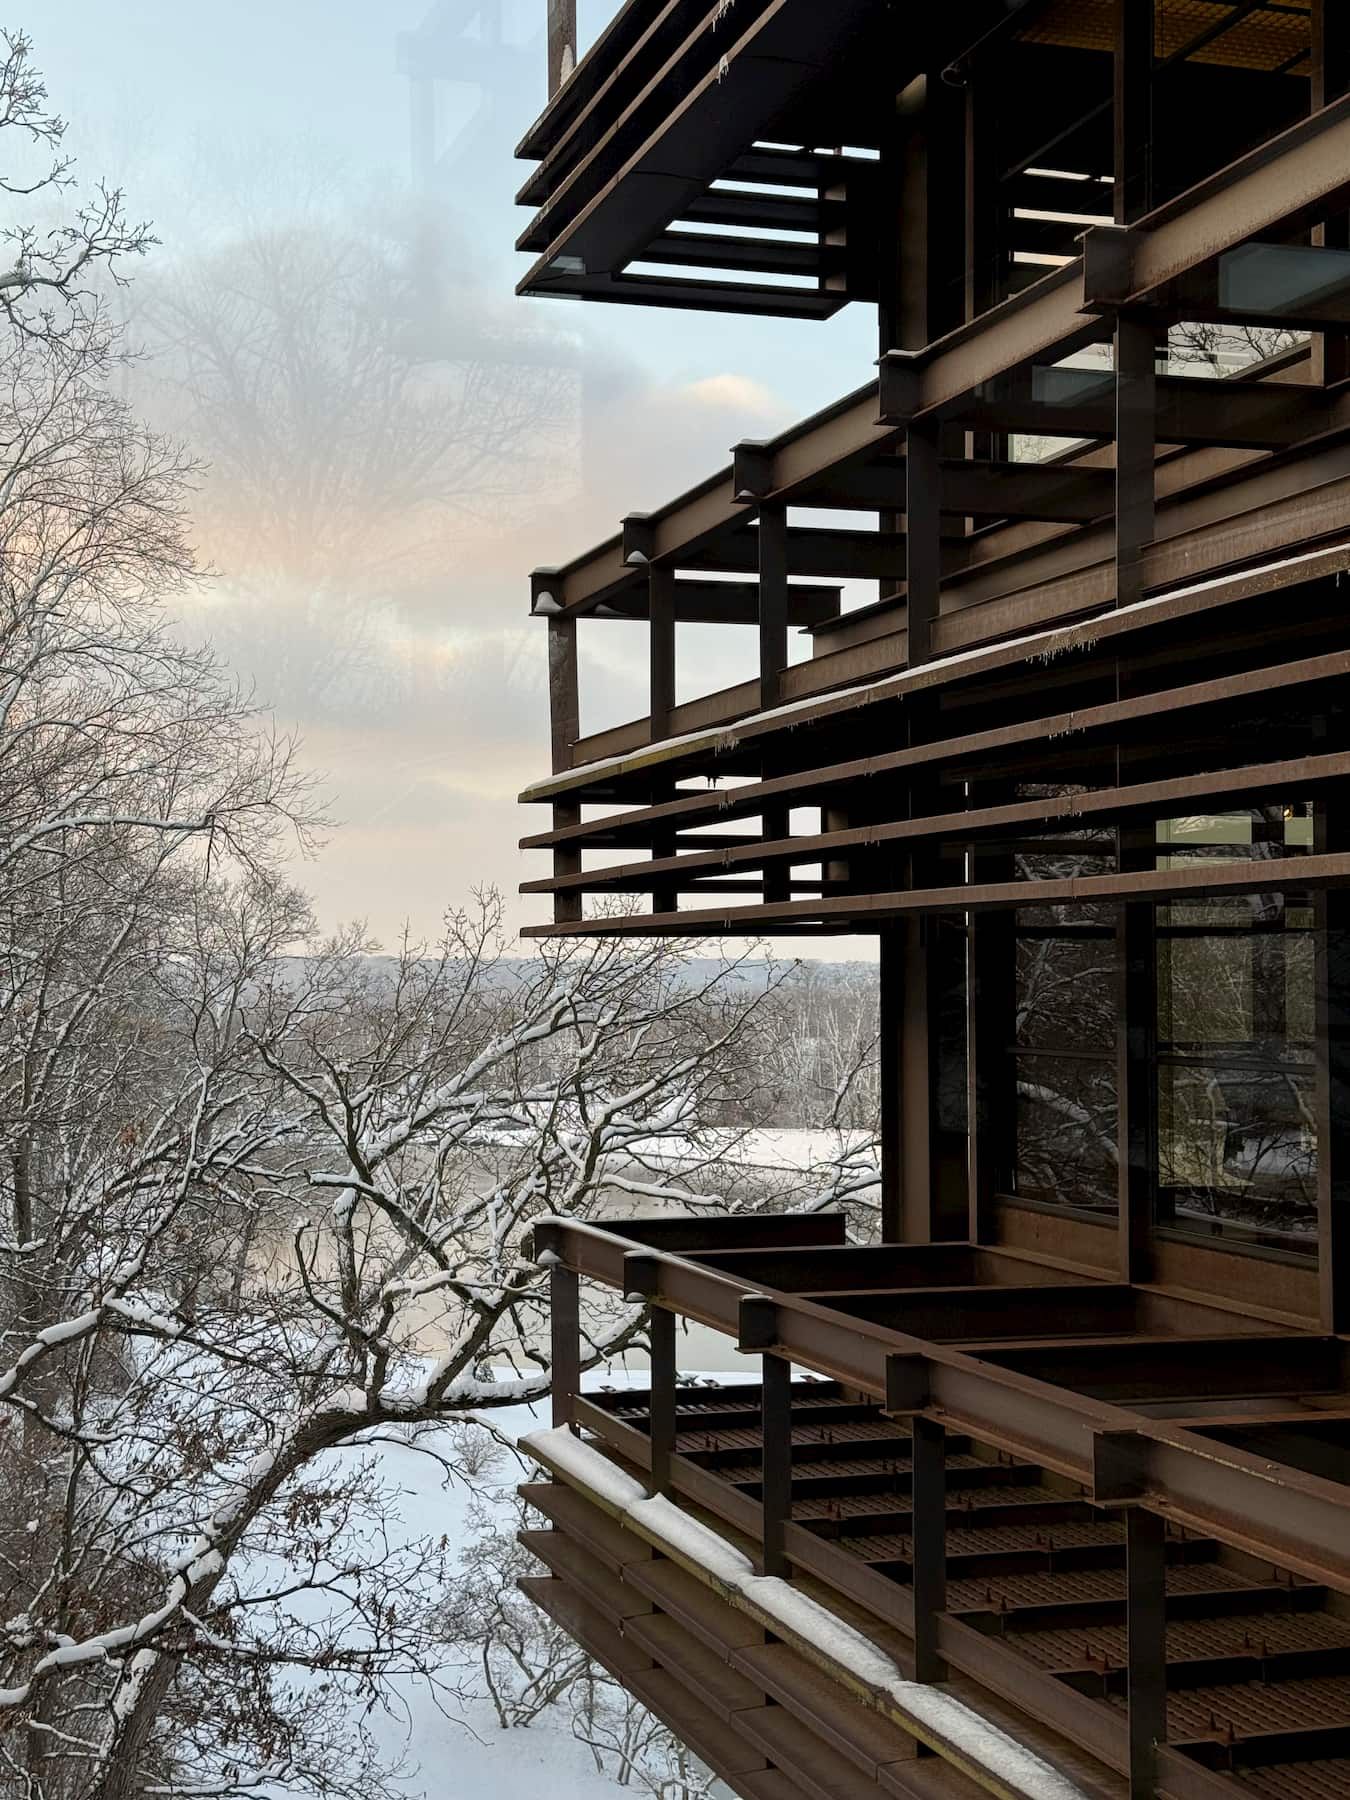 Modern architectural balcony with steel beams and glass windows overlooking a serene, snow-covered landscape with bare trees. The sky is painted with soft hues of blue and orange. The peaceful setting provides a beautiful contrast to the modern building design.